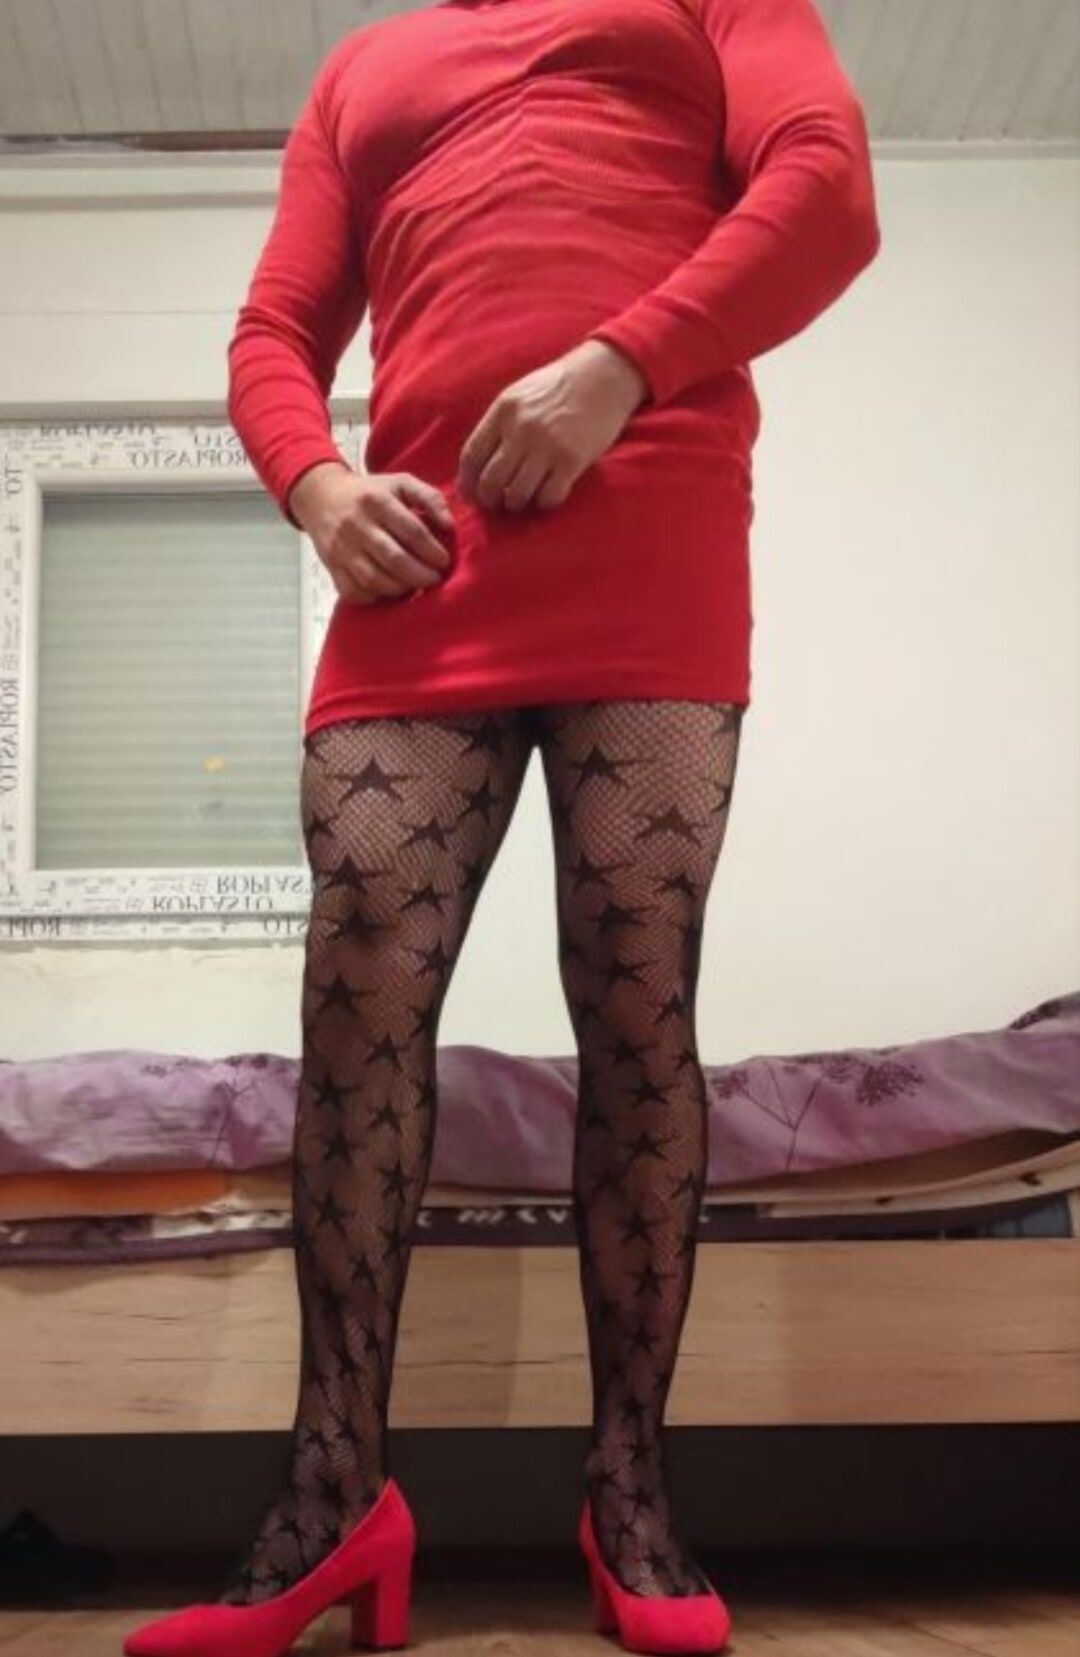 I love red dress and highheels  #2